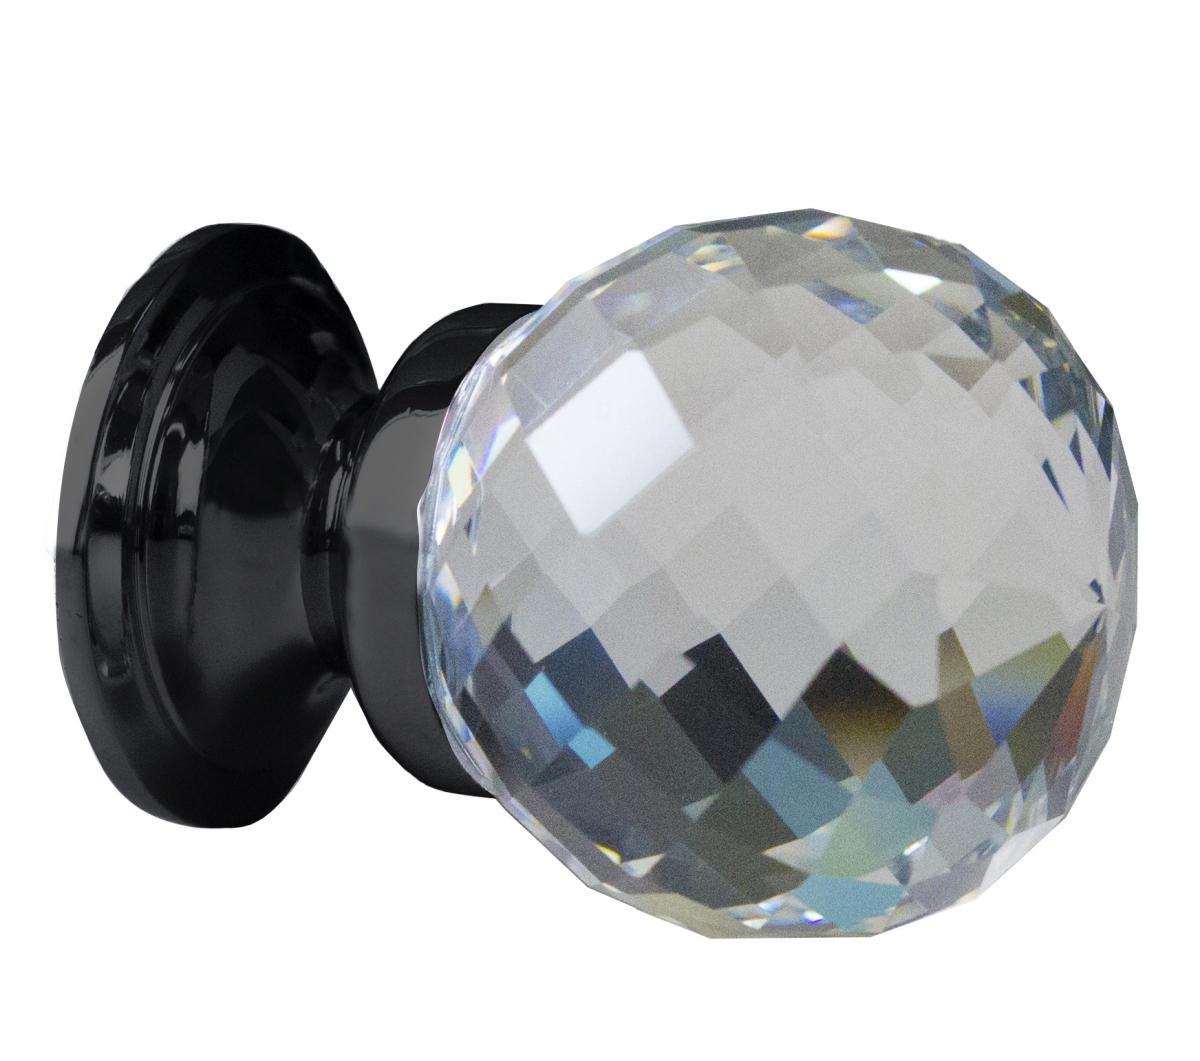 Ai-20717 1.25 In. Round Stainless Steel Cabinet Knob, Black